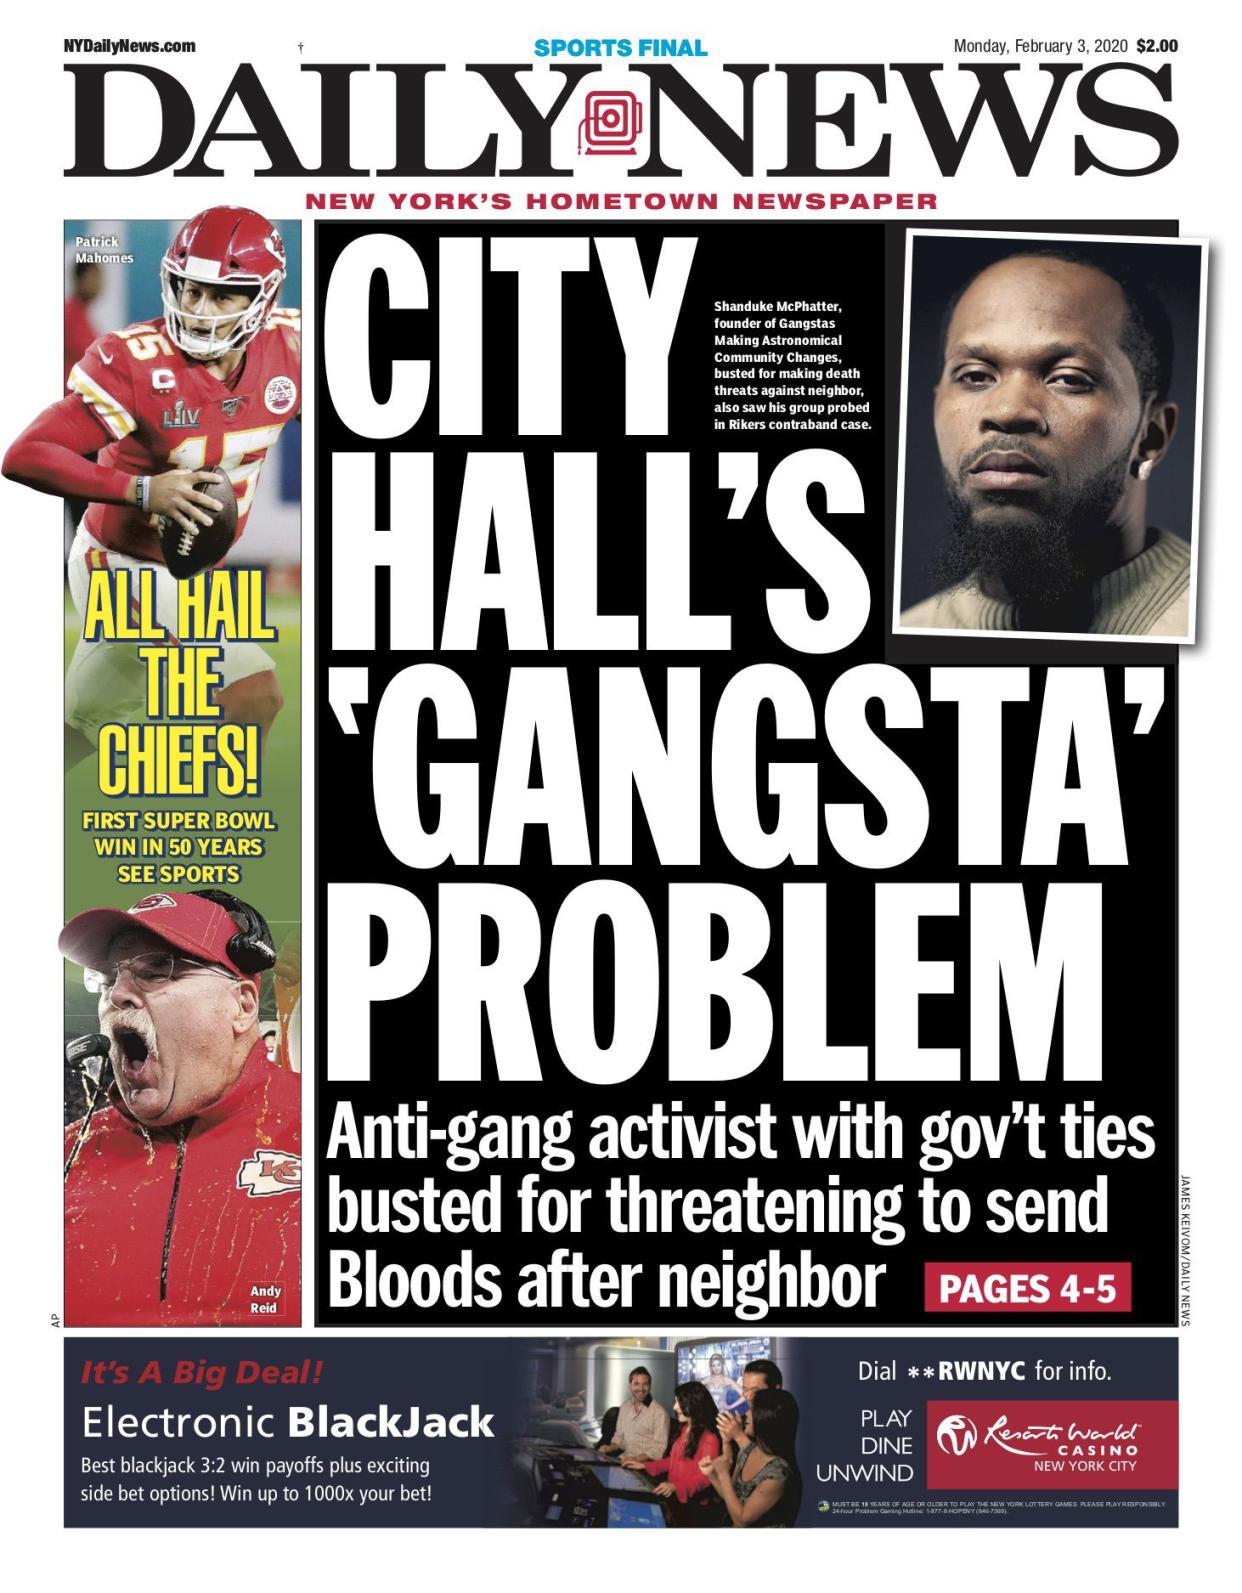 Last year, the Daily News reported about how one prominent violence interrupter Shanduke McPhatter was accused of threatening a neighbor by invoking his ties to the Bloods street gang. 